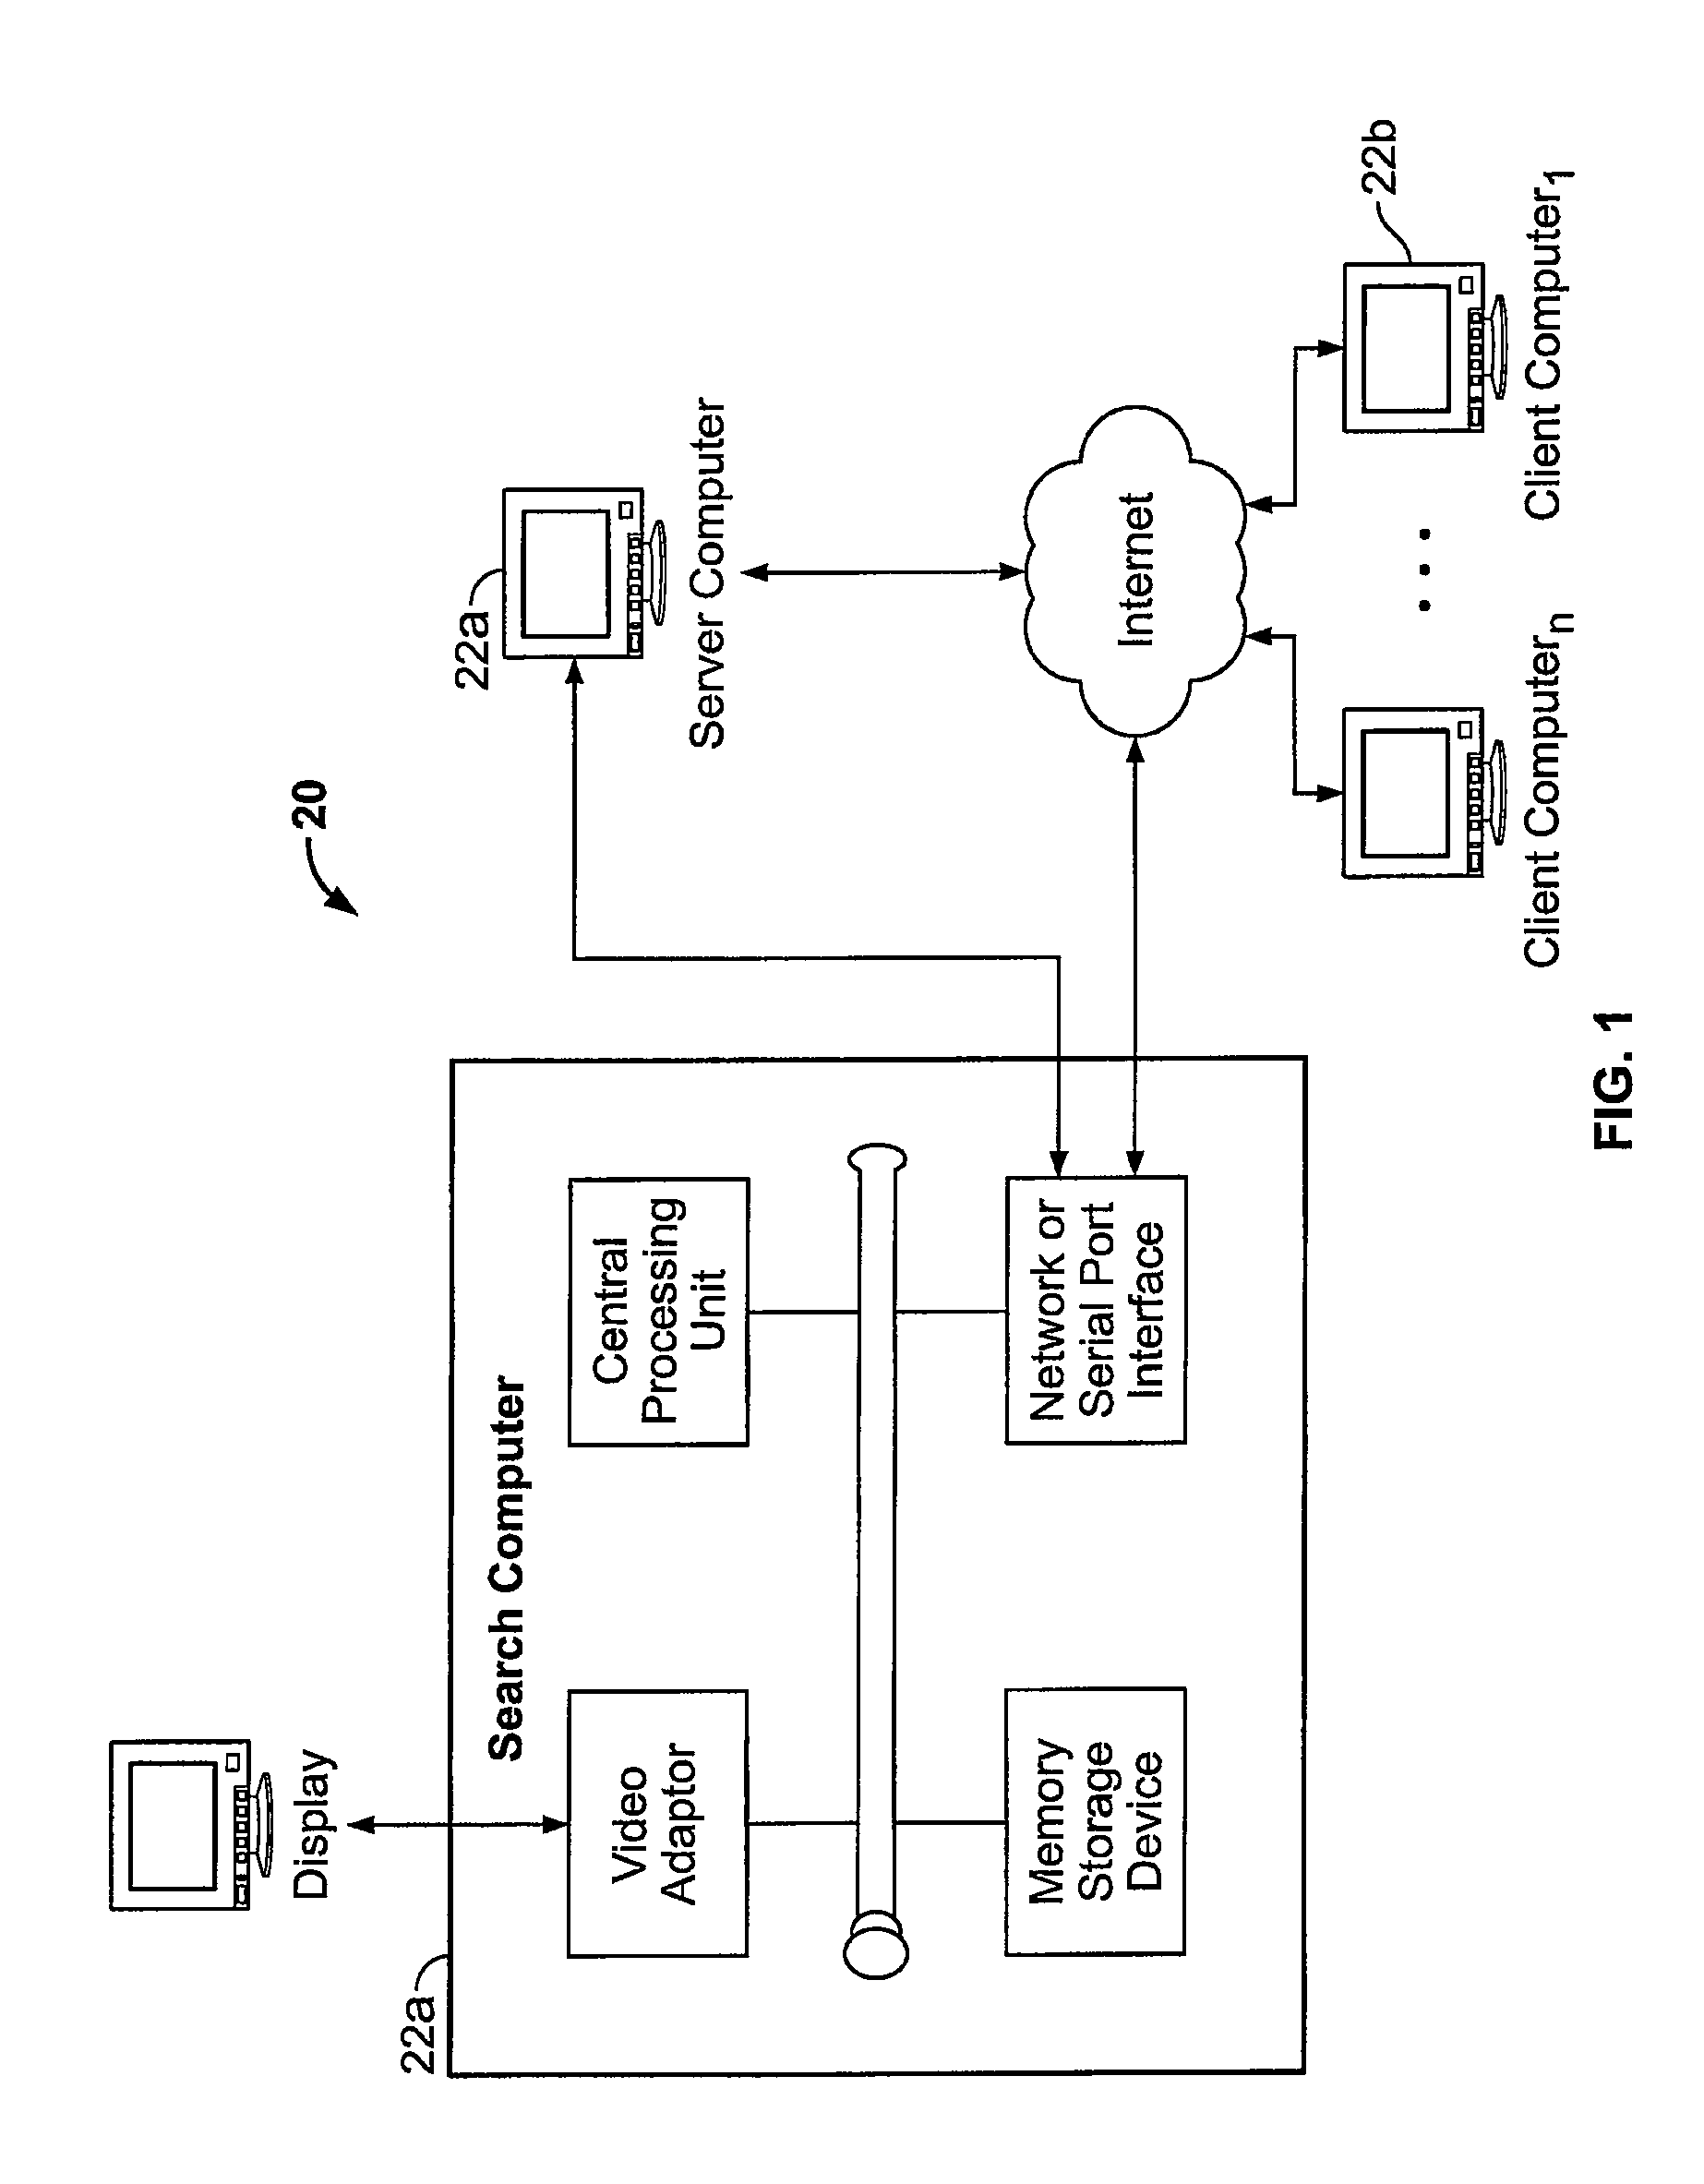 Method and system for matching data sets of non-standard formats